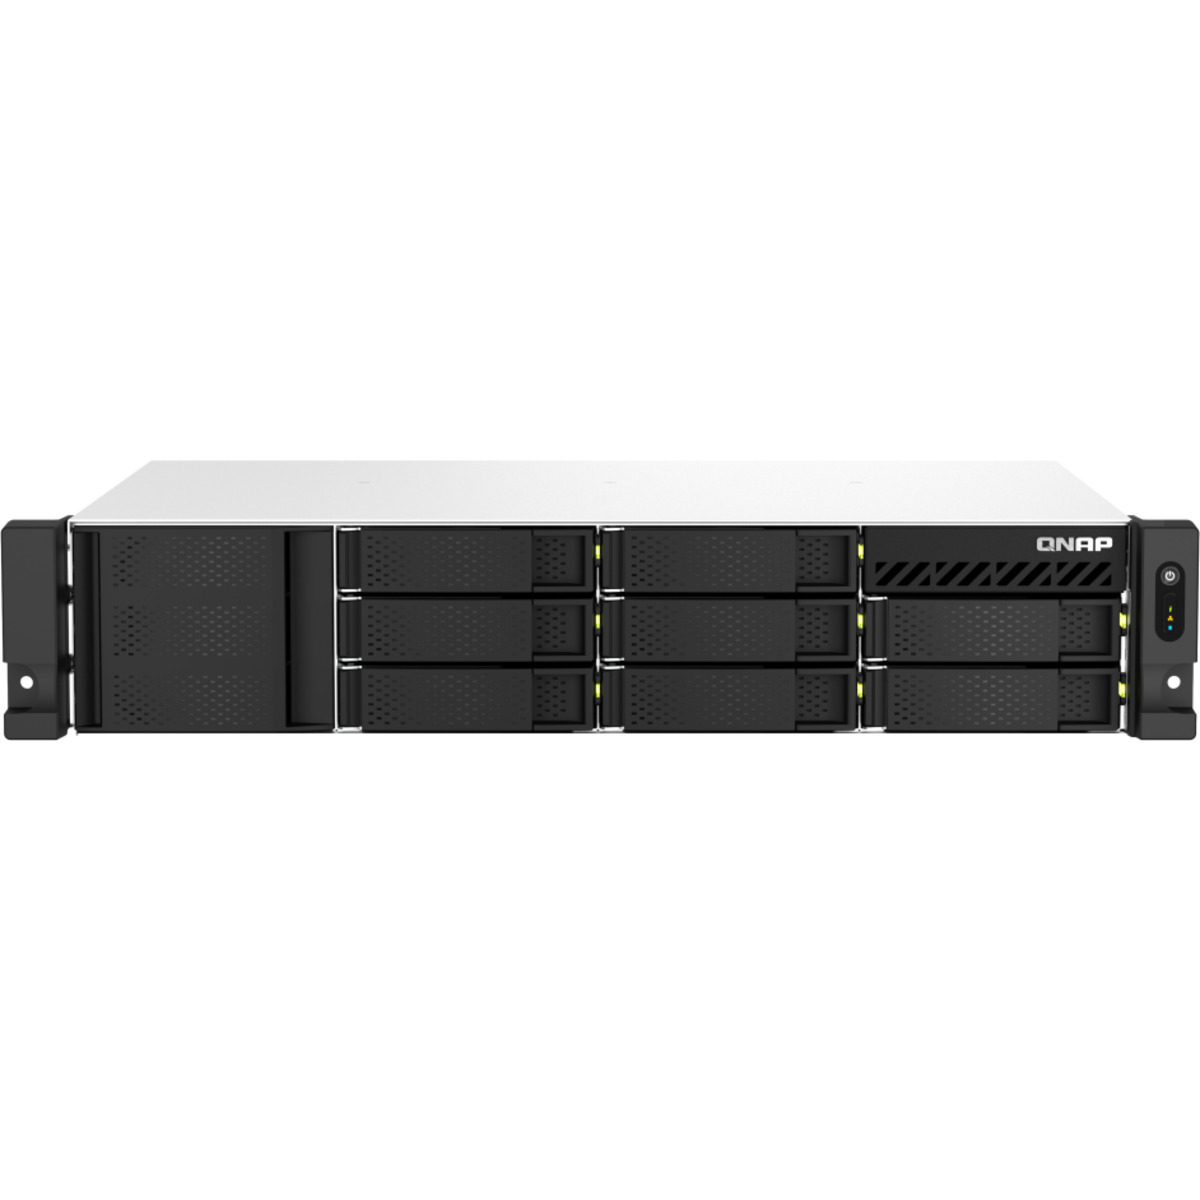 buy QNAP TS-873AeU-RP 176tb RackMount NAS - Network Attached Storage Device 8x22000gb Seagate IronWolf Pro ST22000NT001 3.5 7200rpm SATA 6Gb/s HDD NAS Class Drives Installed - Burn-In Tested - FREE RAM UPGRADE - nas headquarters buy network attached storage server device das new raid-5 free shipping simply usa TS-873AeU-RP